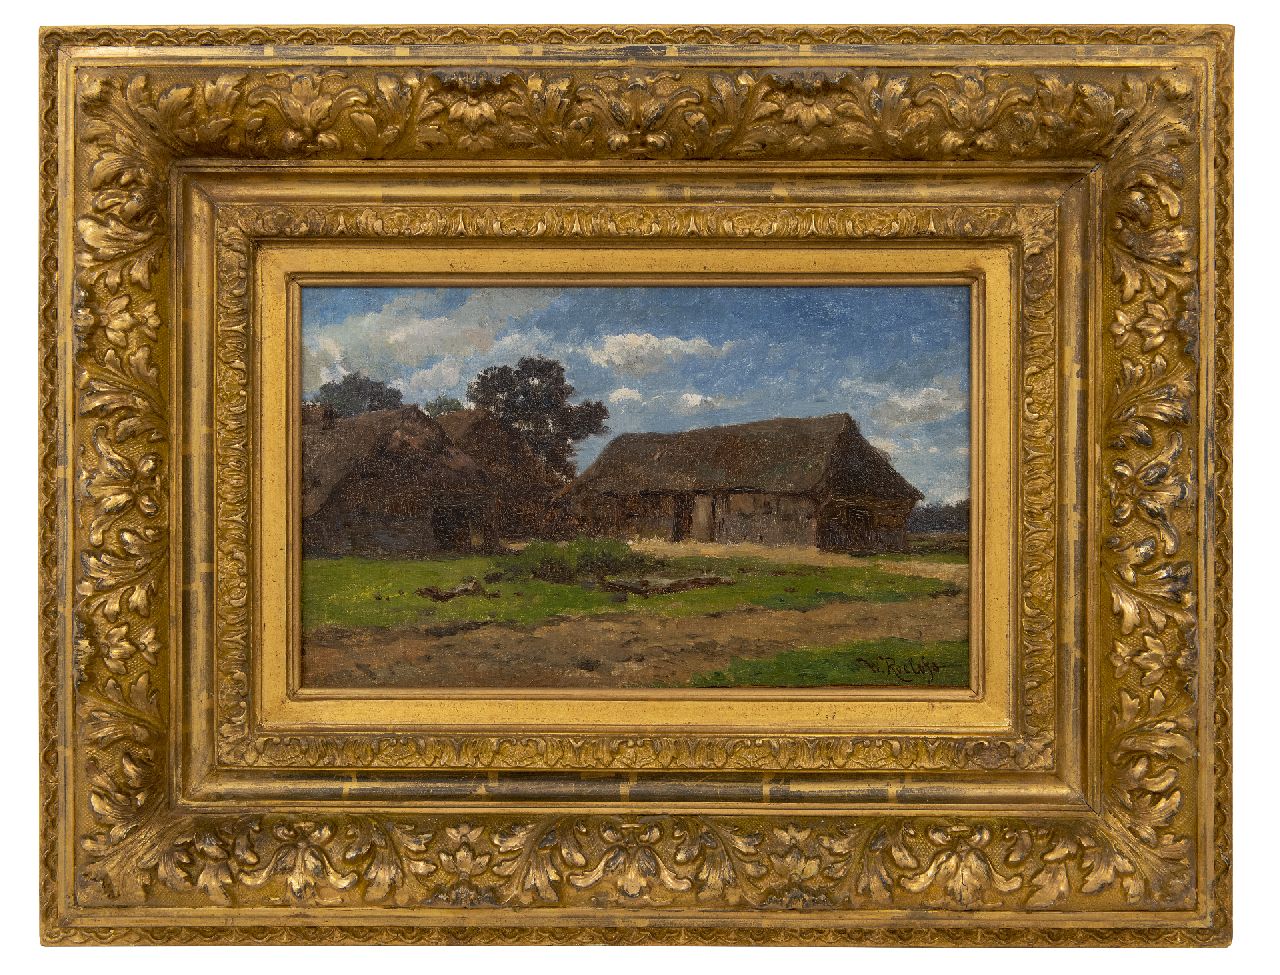 Roelofs W.  | Willem Roelofs | Paintings offered for sale | Farm in Drenthe, oil on canvas laid down on panel 24.8 x 39.6 cm, signed l.r.